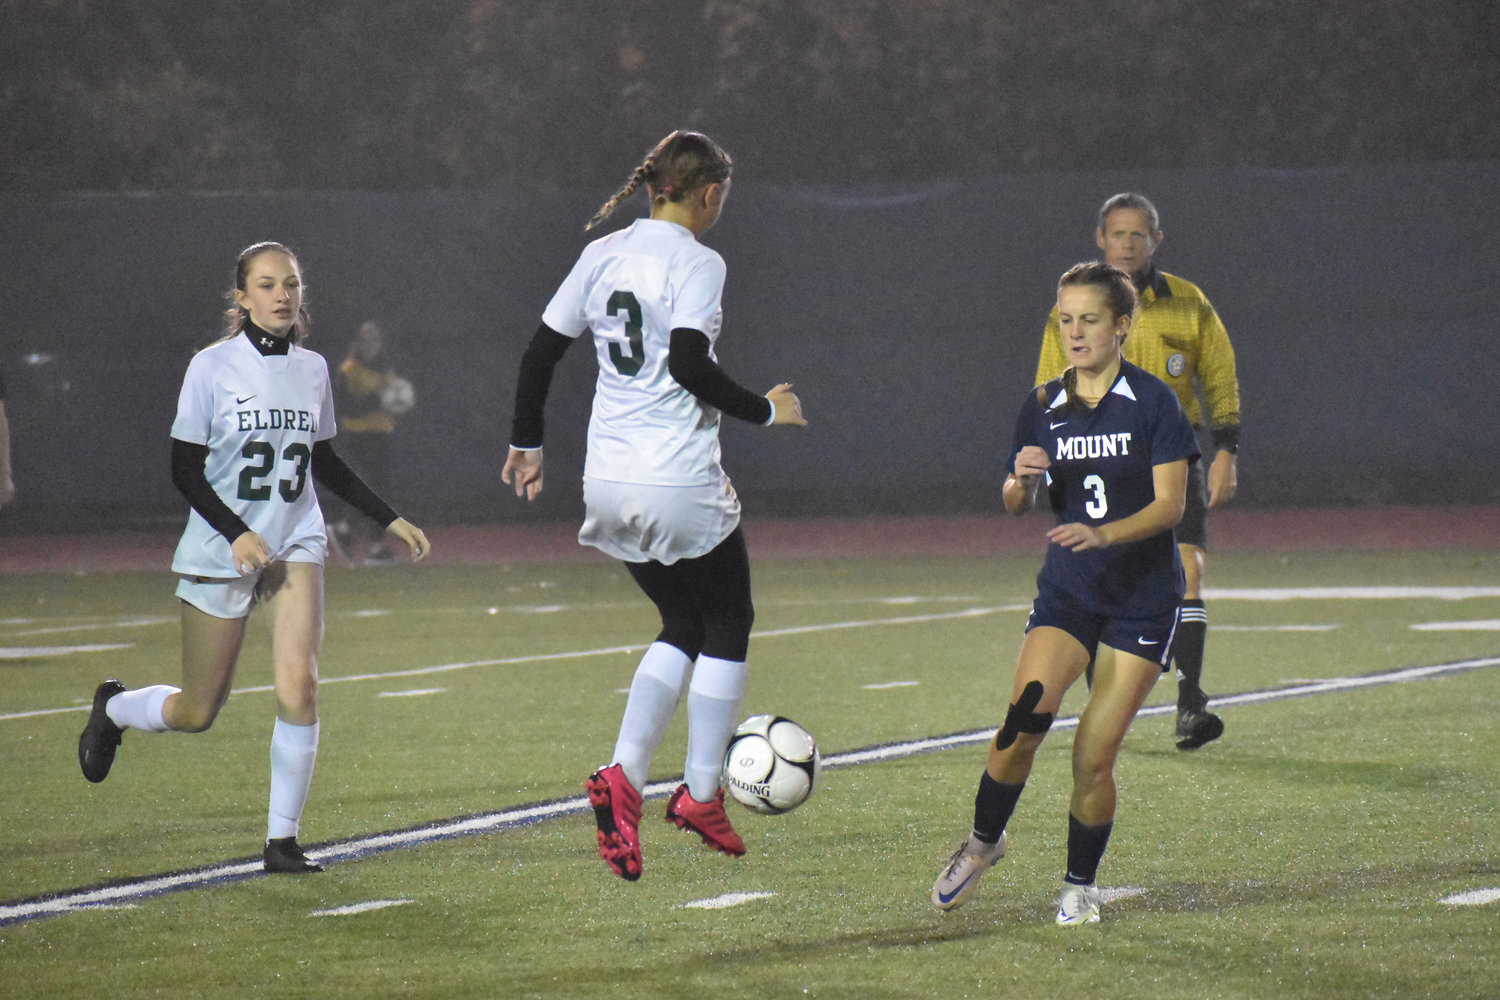 Jillian Smith leaves her feet to redirect a pass in Monday night’s Class D Championship game for Section IX. Mount Academy won the game and will look to repeat as NYS Champs.